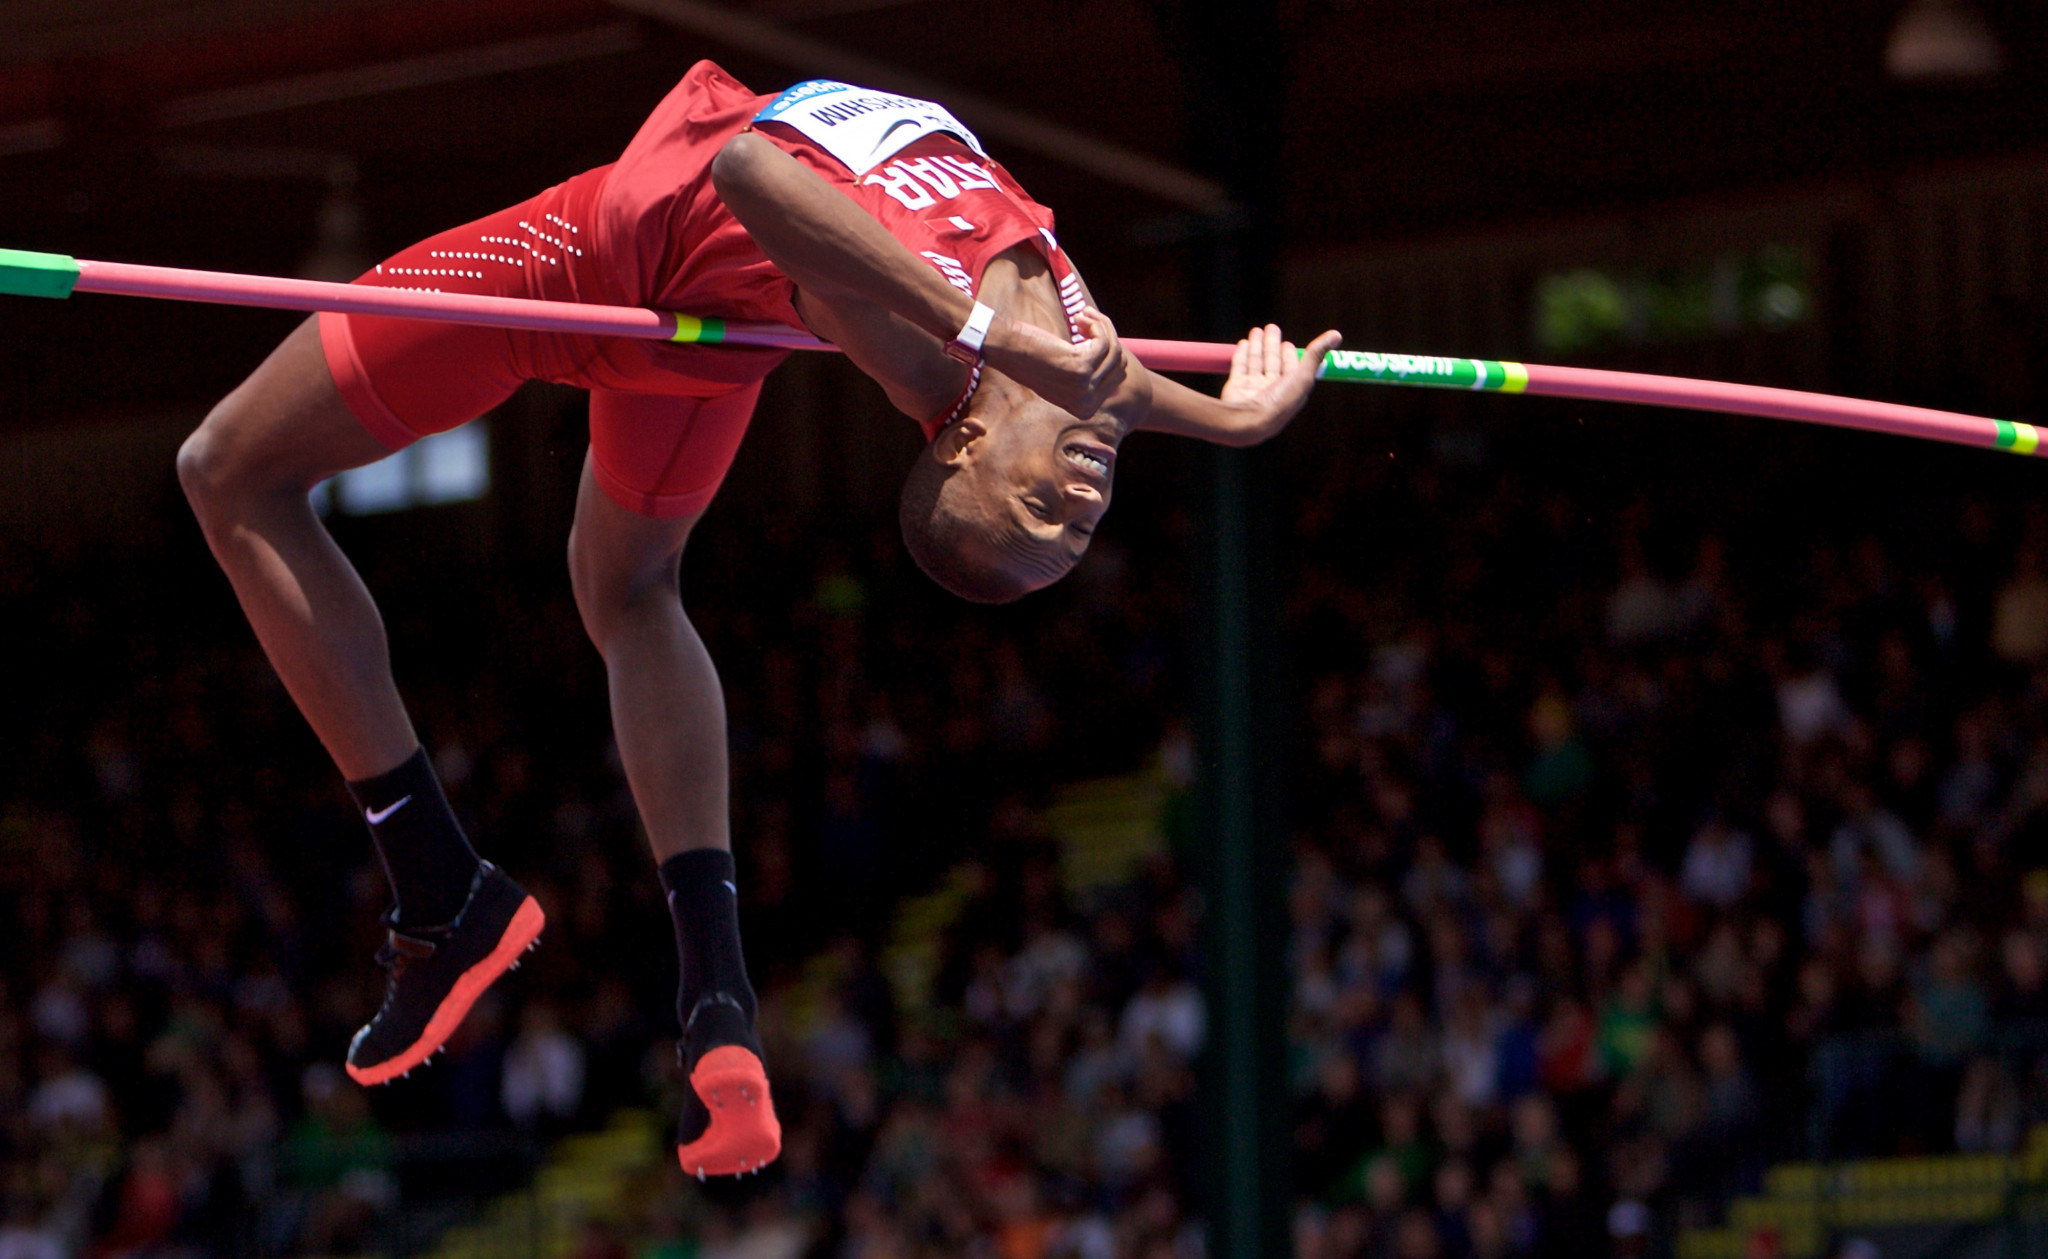 Mutaz Essa Barshim will compete in the high jump in Oslo ©Getty Images